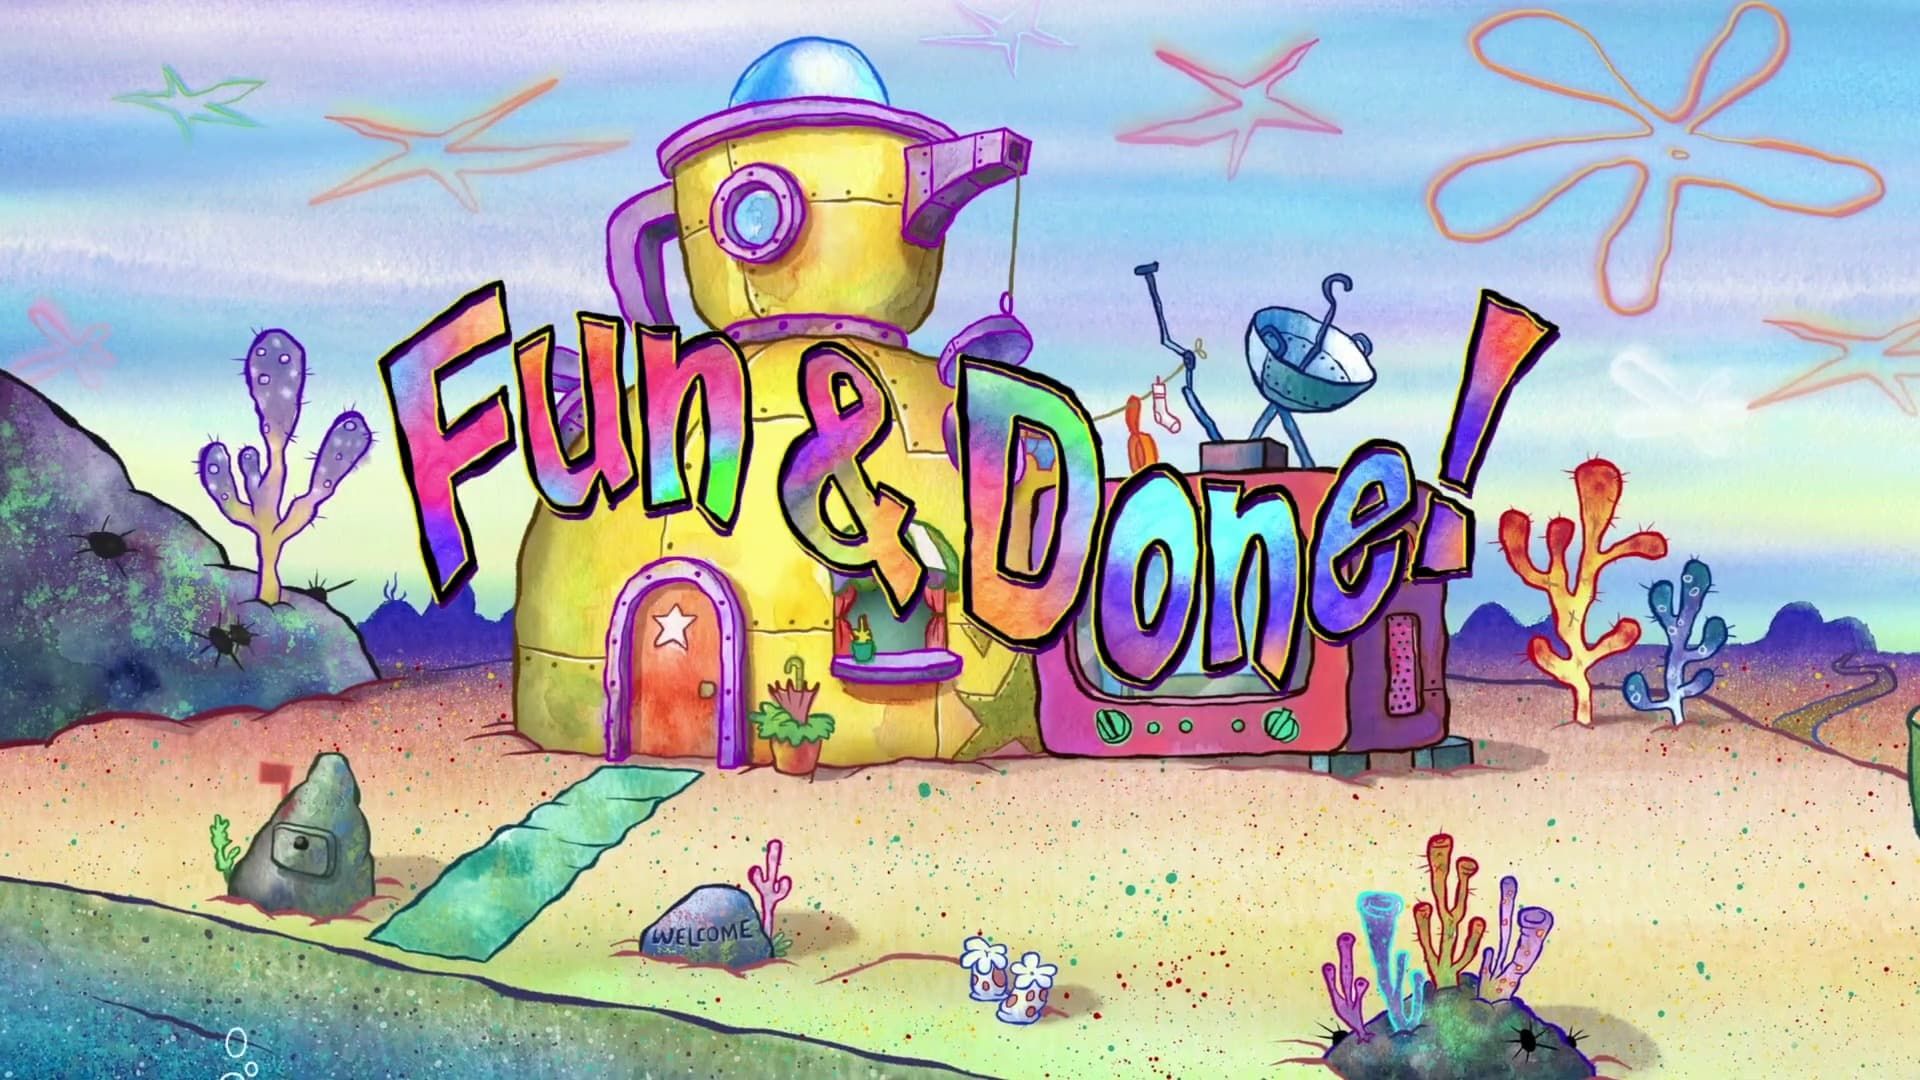 The Patrick Star Show background